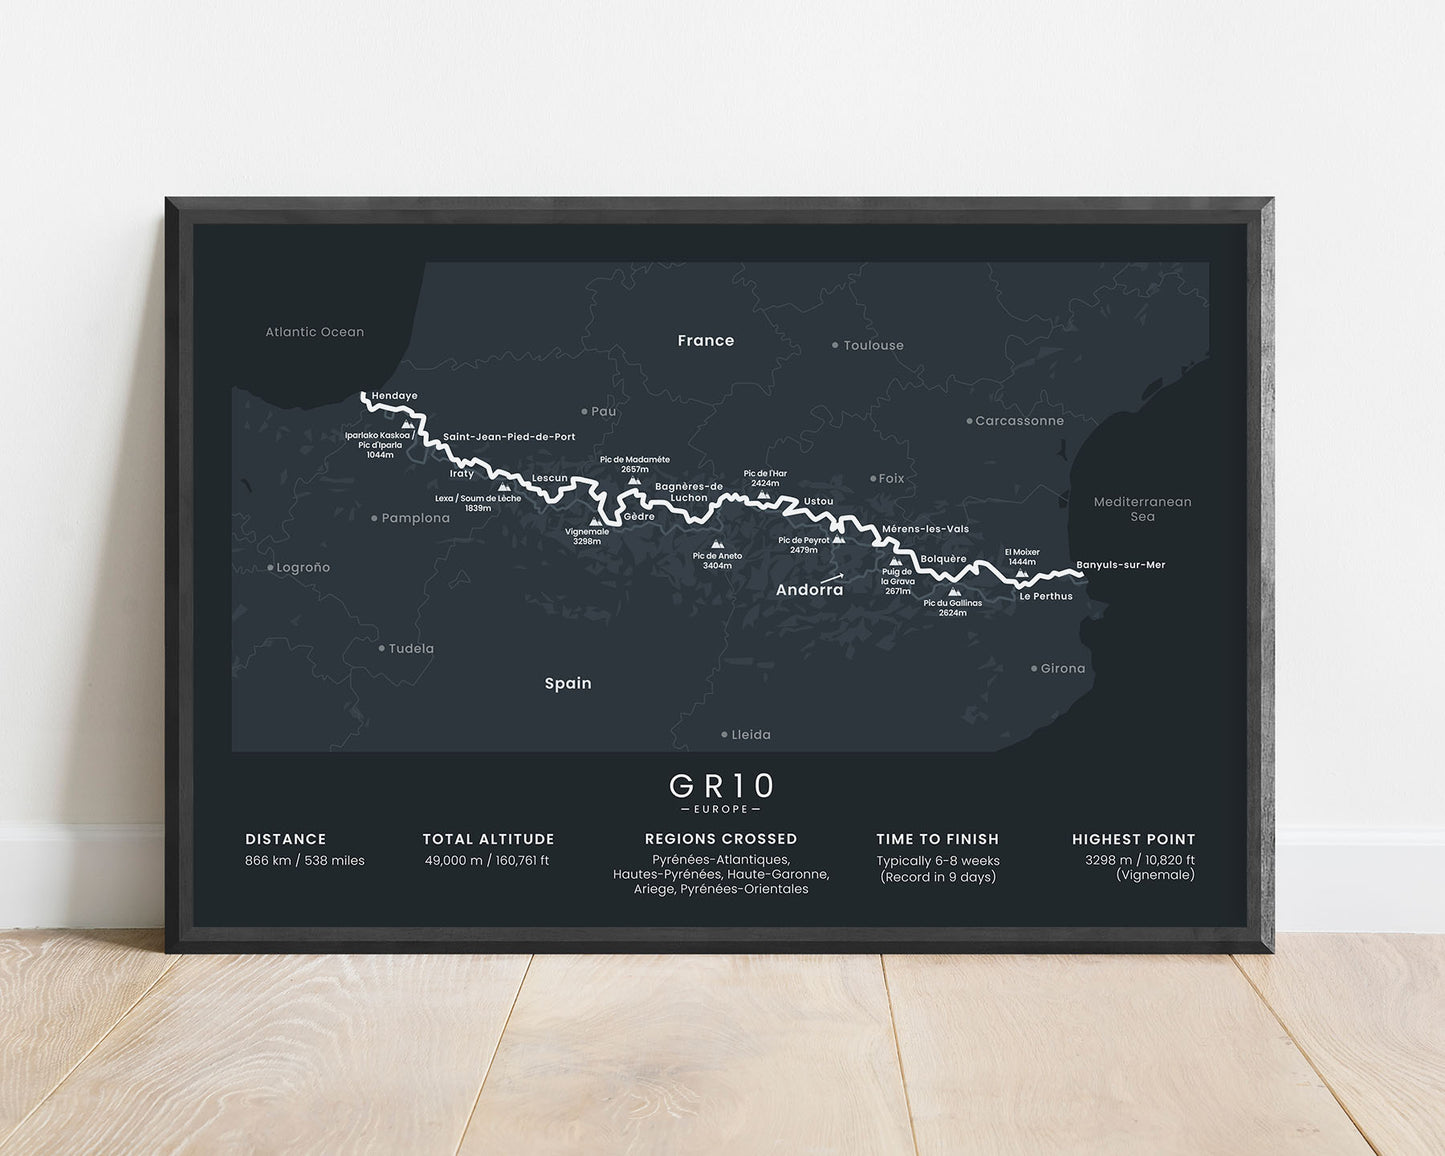 GR10 (From the Atlantic Ocean to the Mediterranean Sea) hiking trail wall map with black background